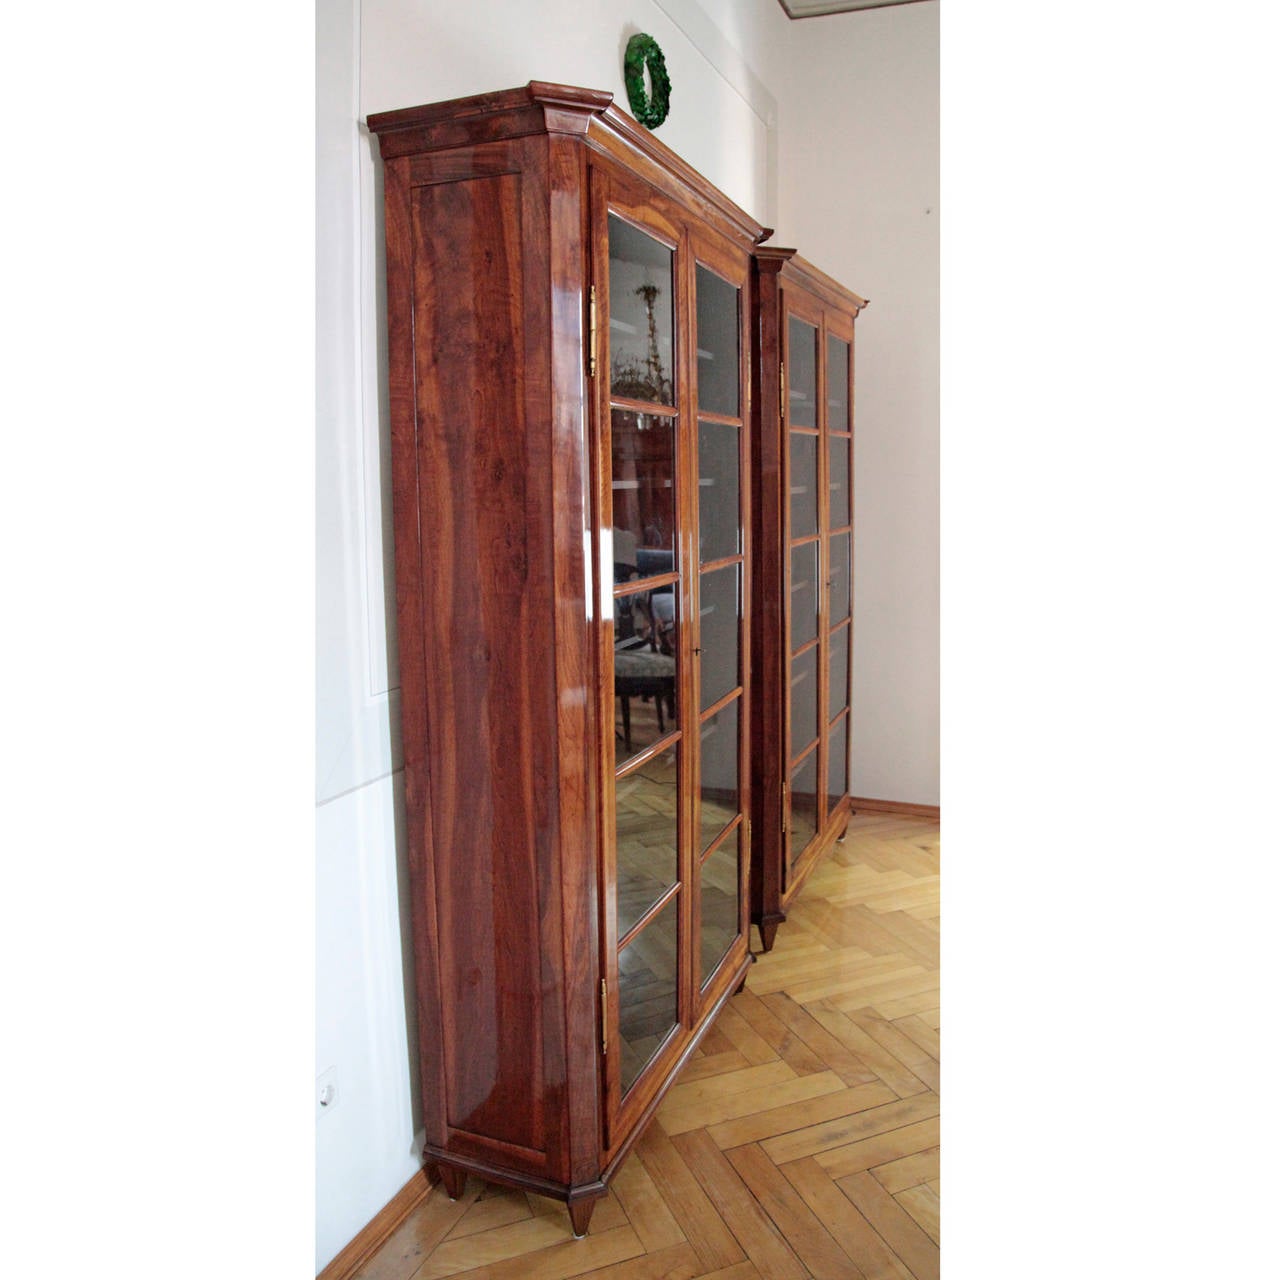 Elegant Pair of German Biedermeier Bookcases from the 1820s. 
The two walnut bookcases stand on four tapered square feet and are glazed at the front. The front corners are slanted, the lower rim and upper edge slightly protrude and are profiled.